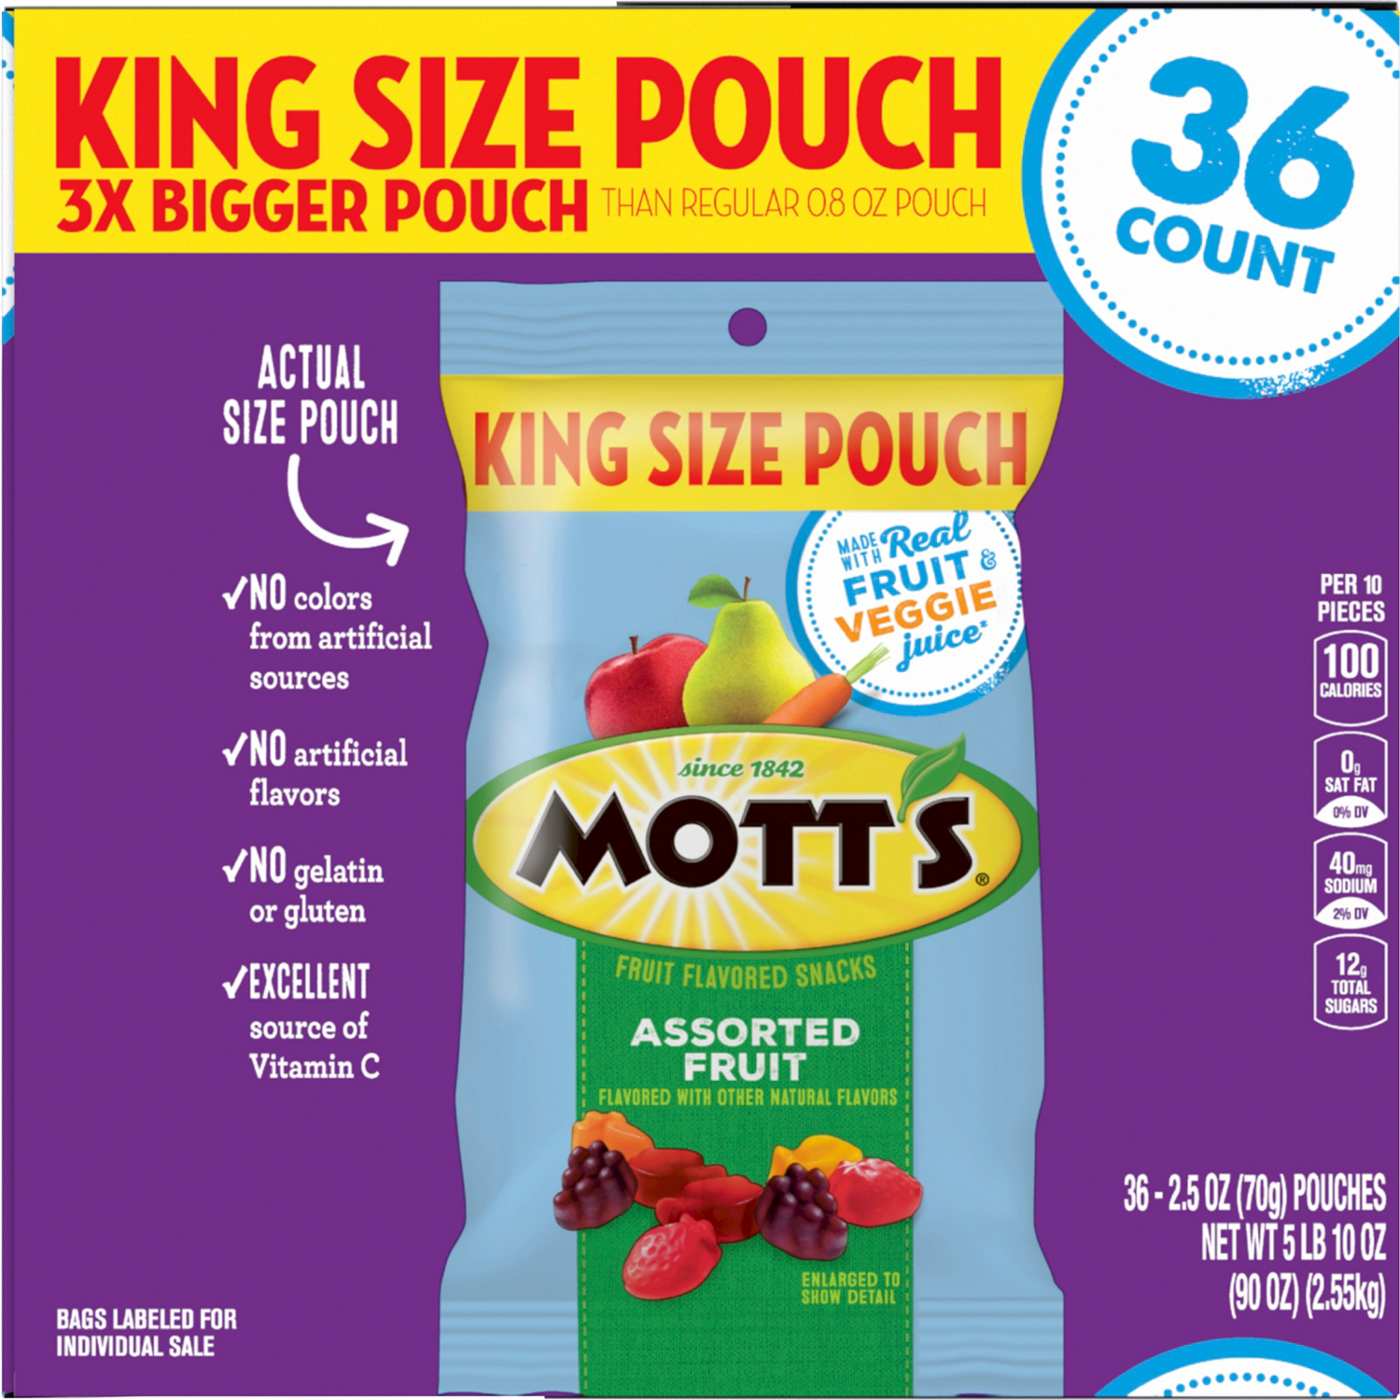 Mott's Assorted Fruit Snacks King Size Pouches; image 1 of 2